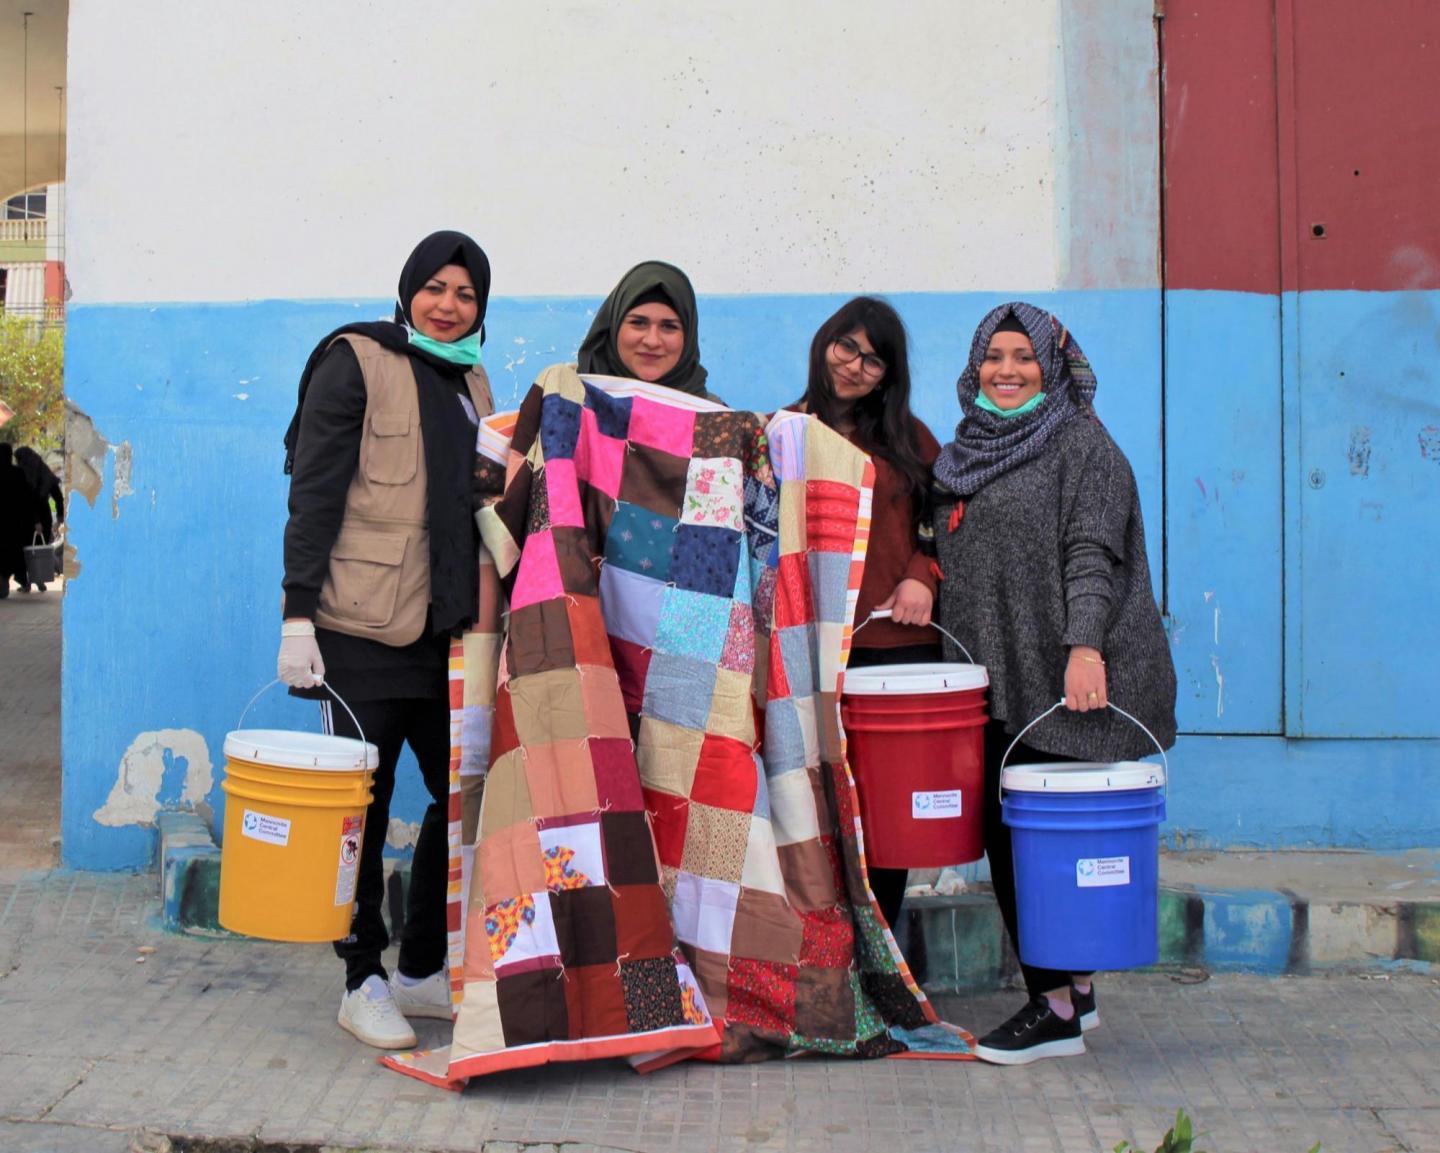 Four women stand together and pose with a comforter and three five-gallon buckets.